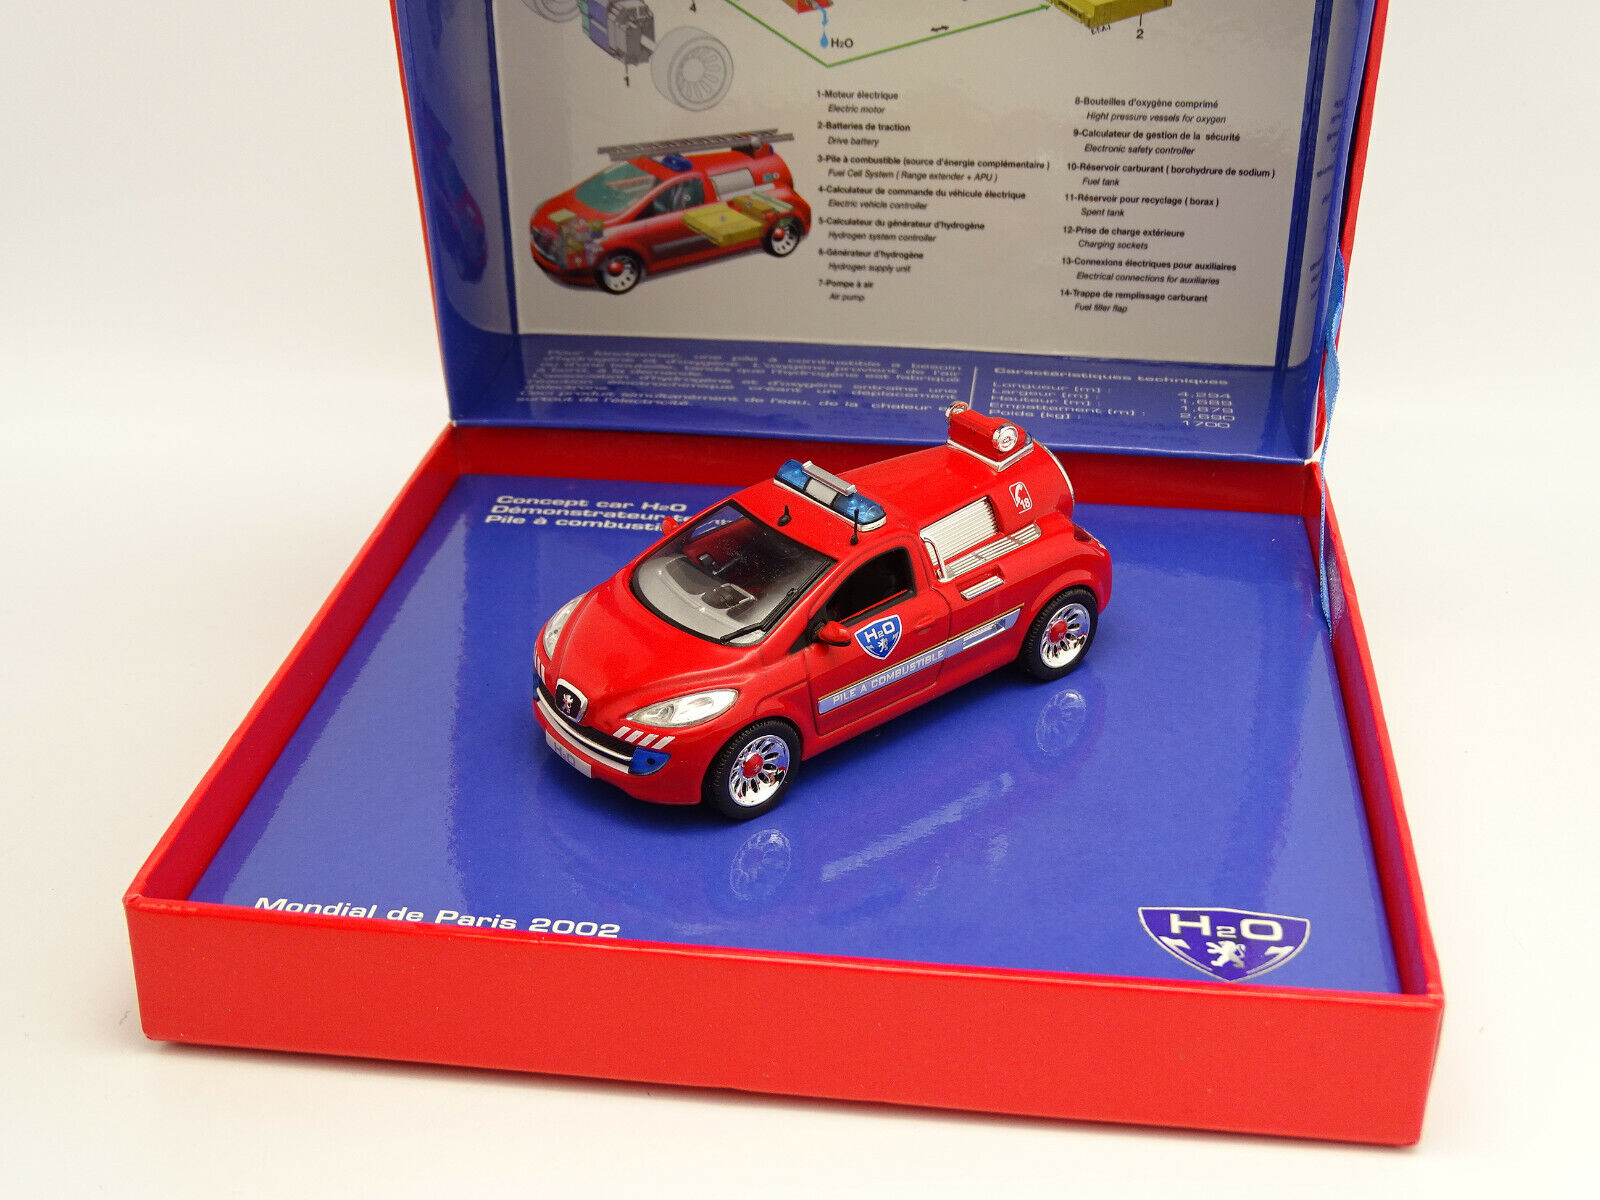 NOREV 1/43 - Boxset Peugeot 206 H2O Firefighters Concept Car